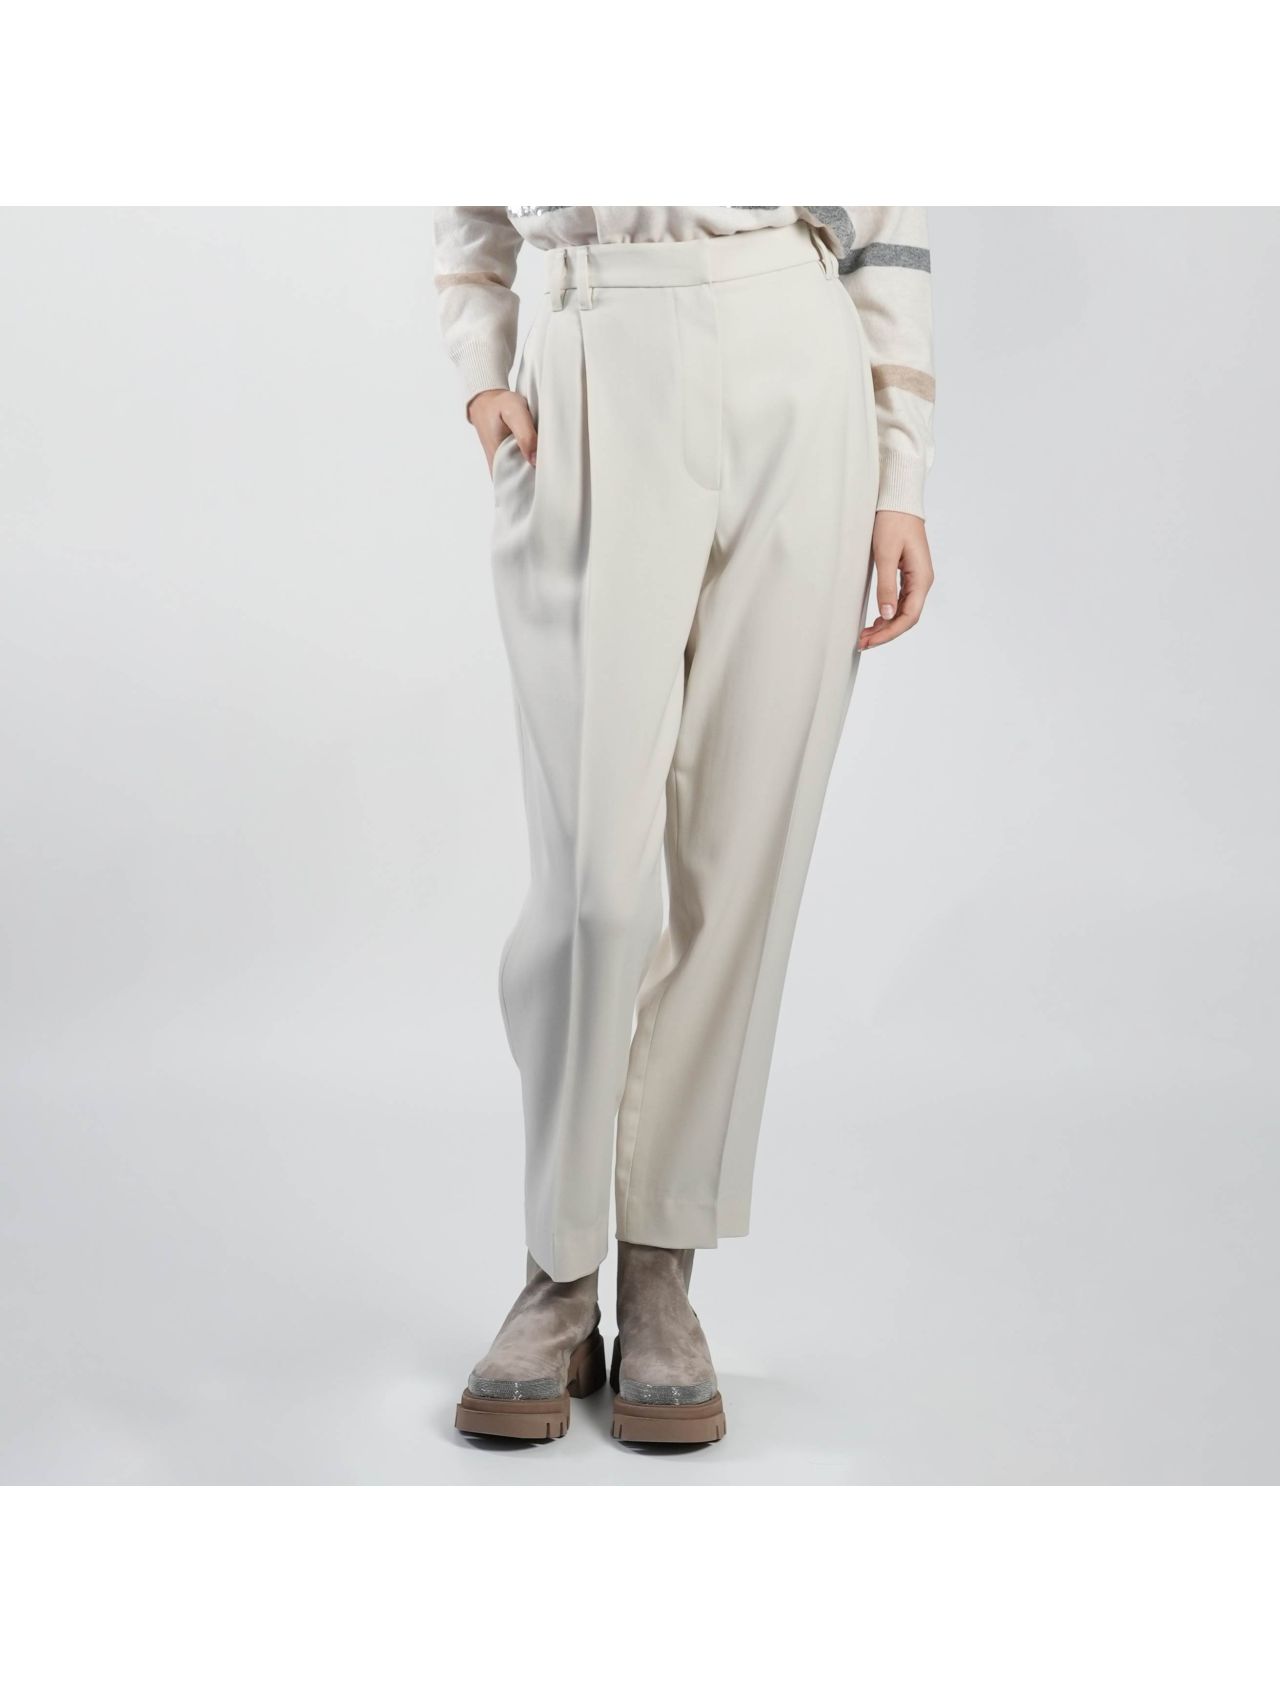 Opp Suit Pants - Taupe